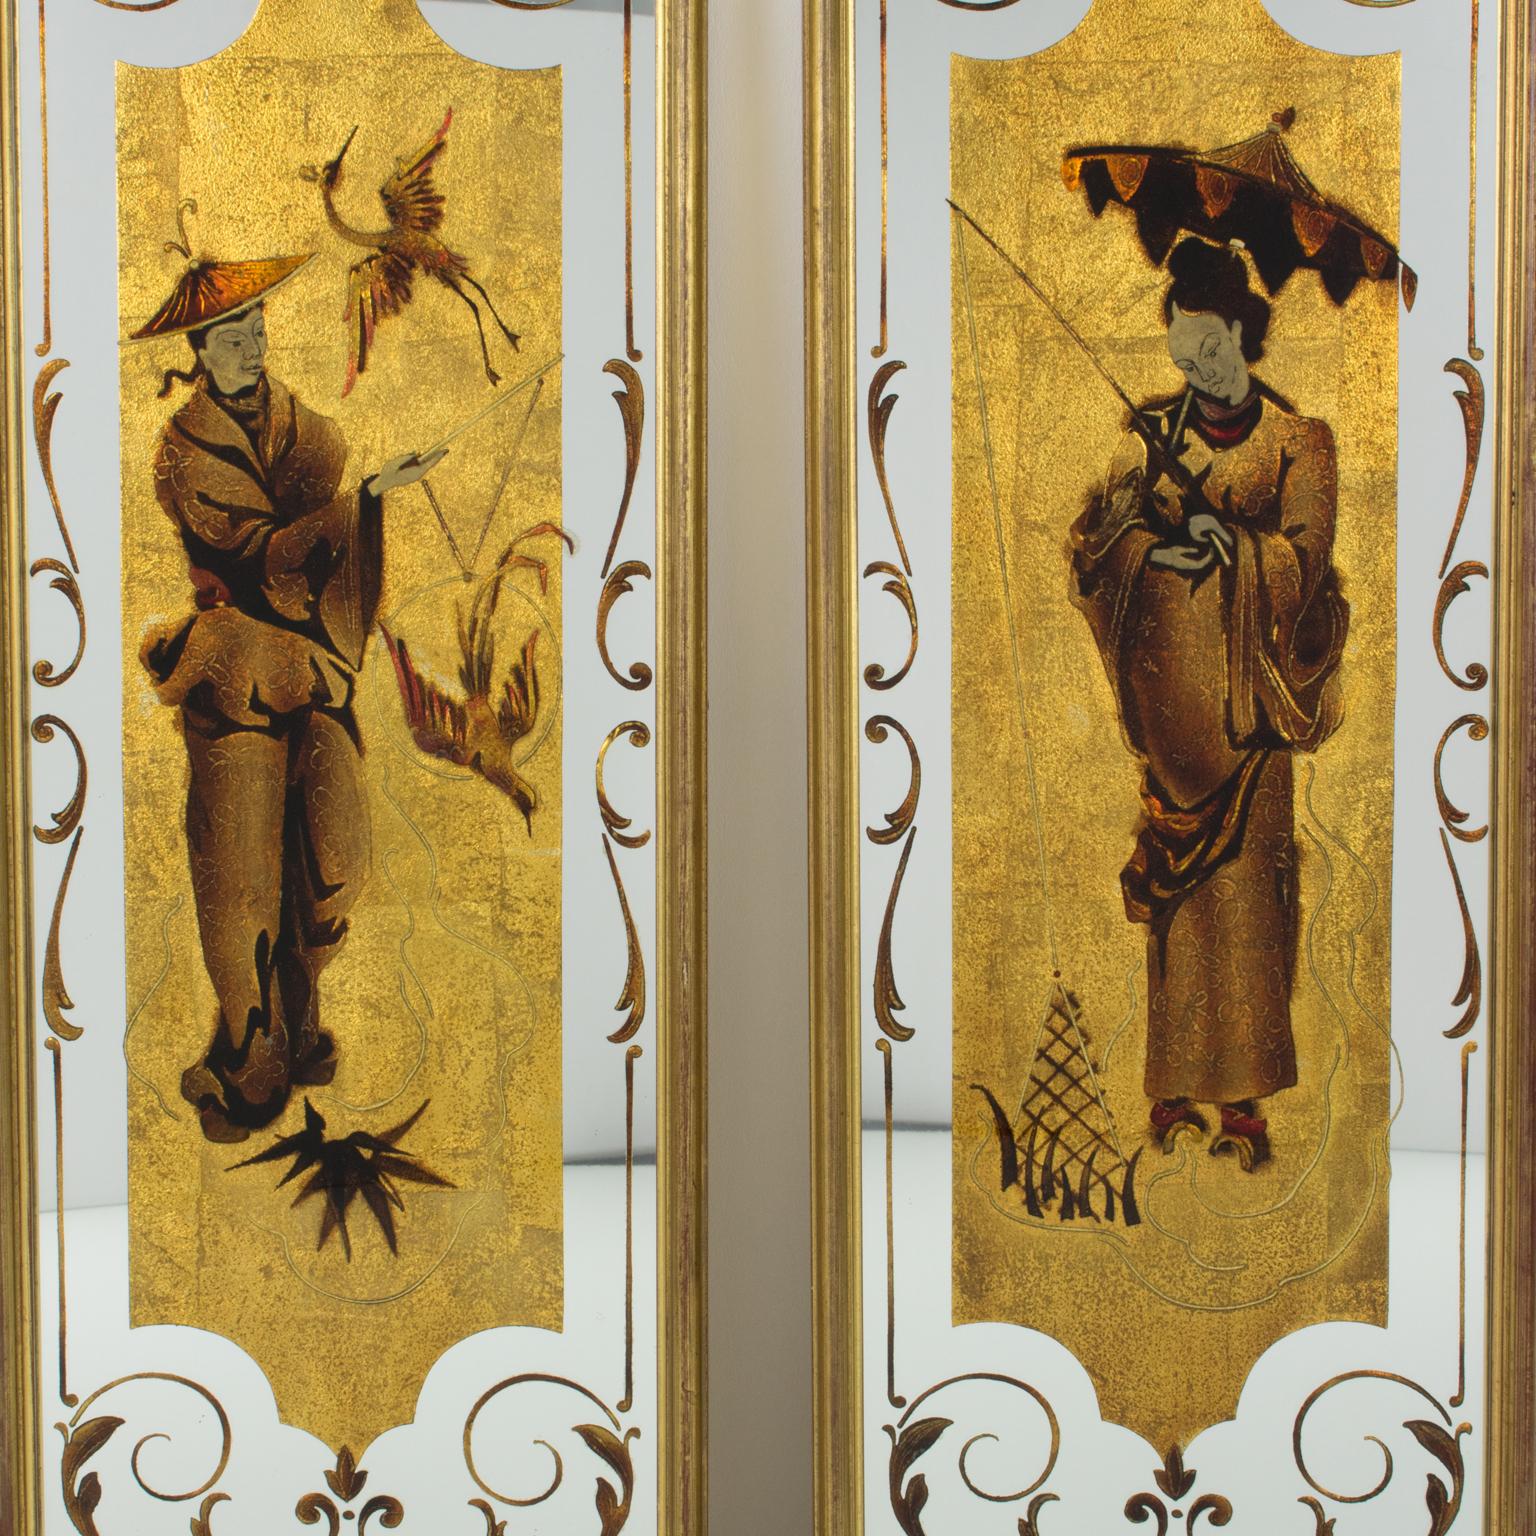 Robert Pansart (1909-1973) designed this stunning pair of églomisé mirrored glass wall-mounted panels in the 1940s. The panels feature an elongated shape with an Asian-inspired design (chinoiserie) with a man and a woman in traditional outfits